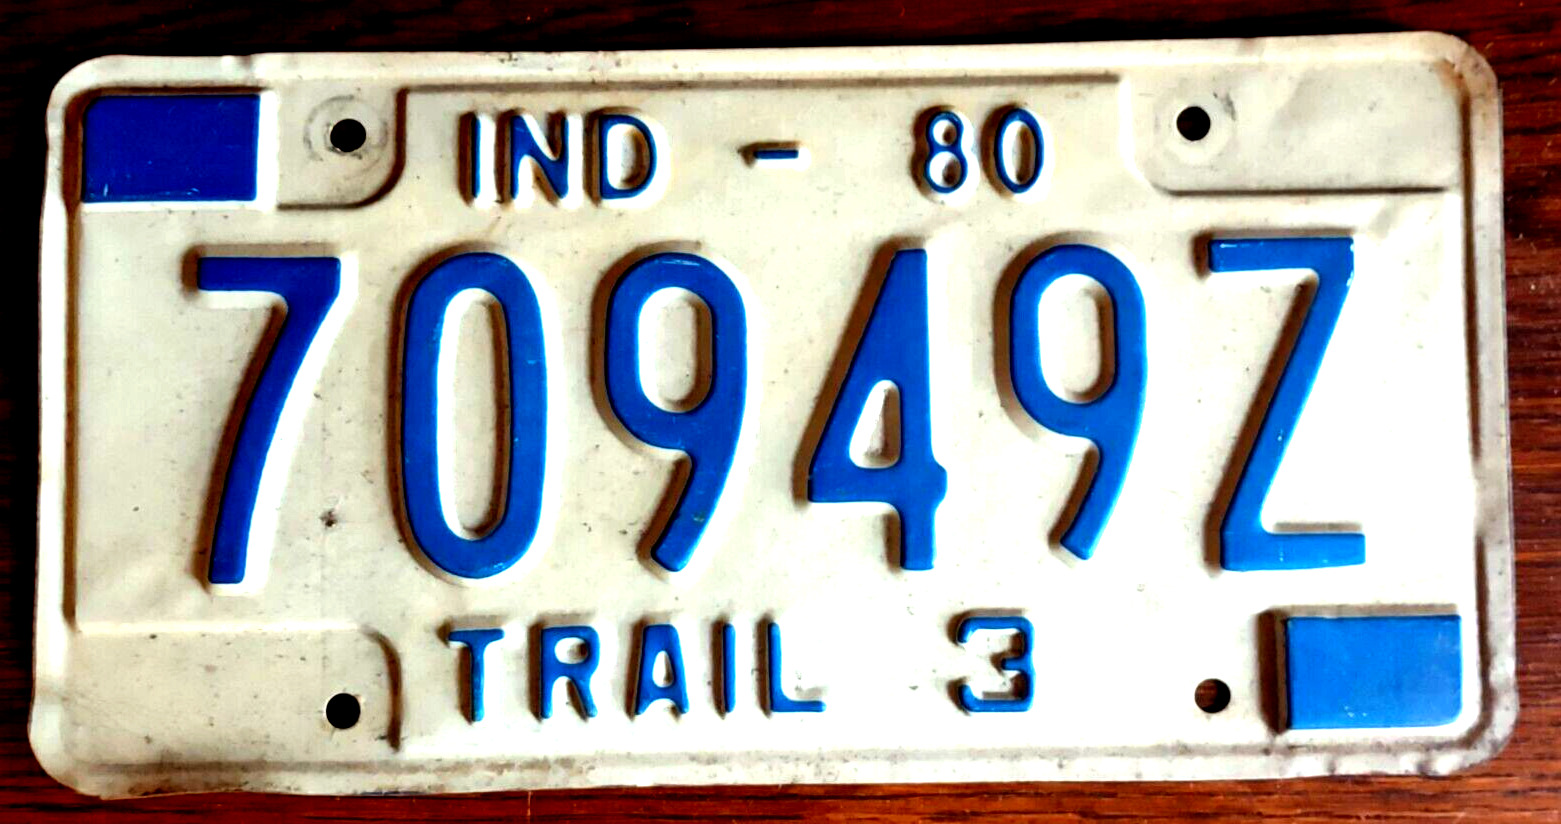 Indiana 1980 Blue on White Metal Expire License Plate Tag 70949Z Trail 3 Trailer